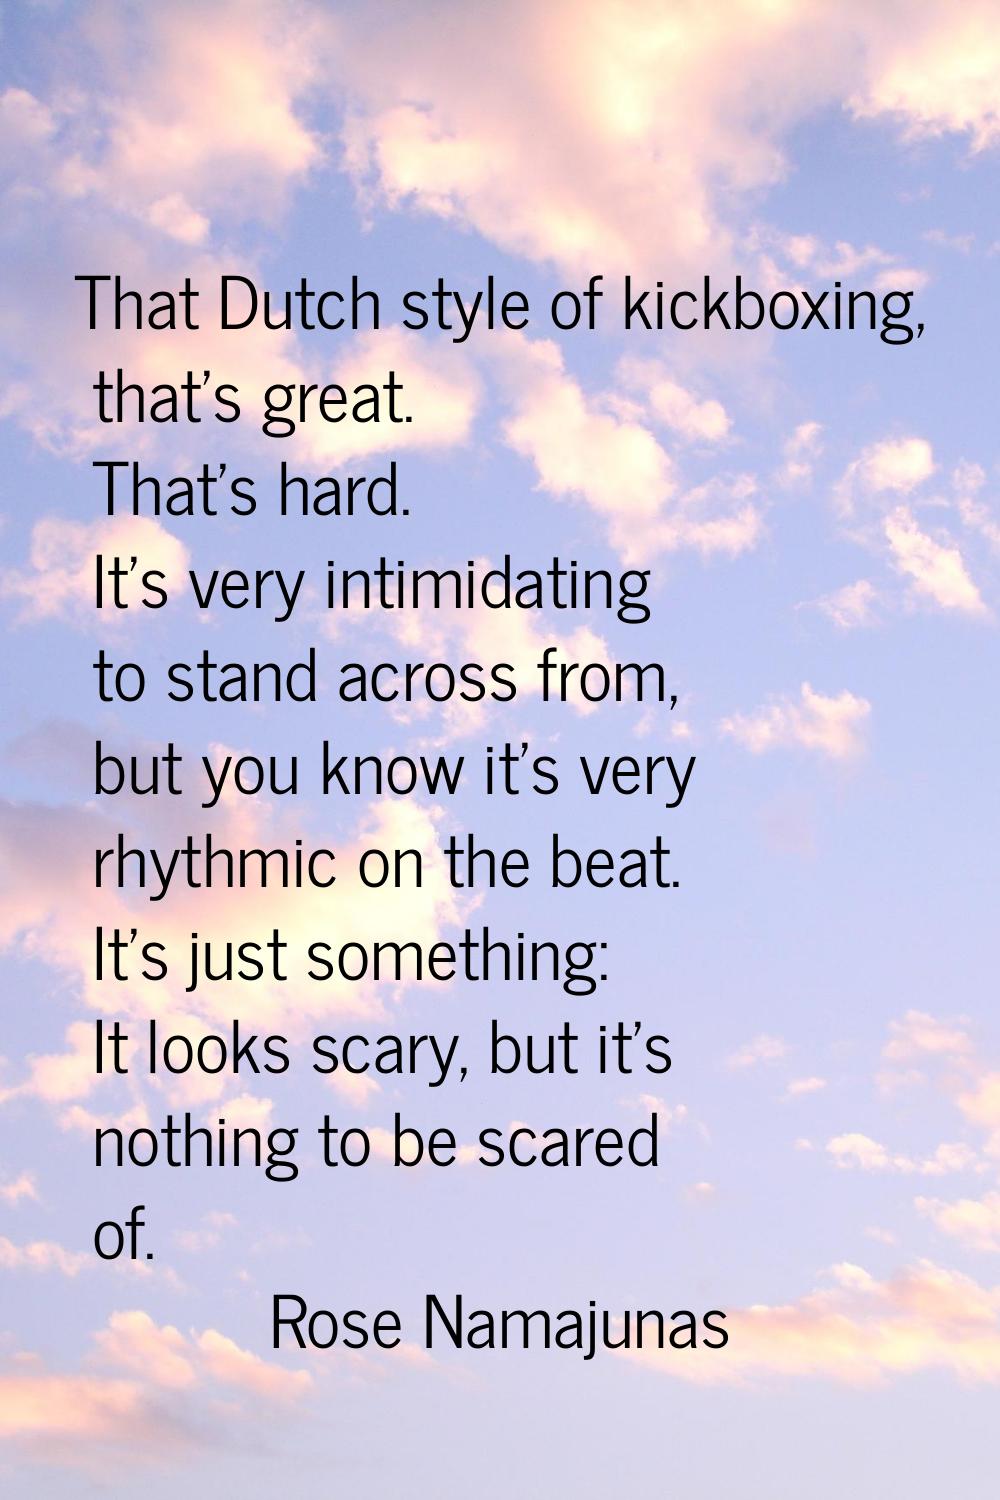 That Dutch style of kickboxing, that's great. That's hard. It's very intimidating to stand across f